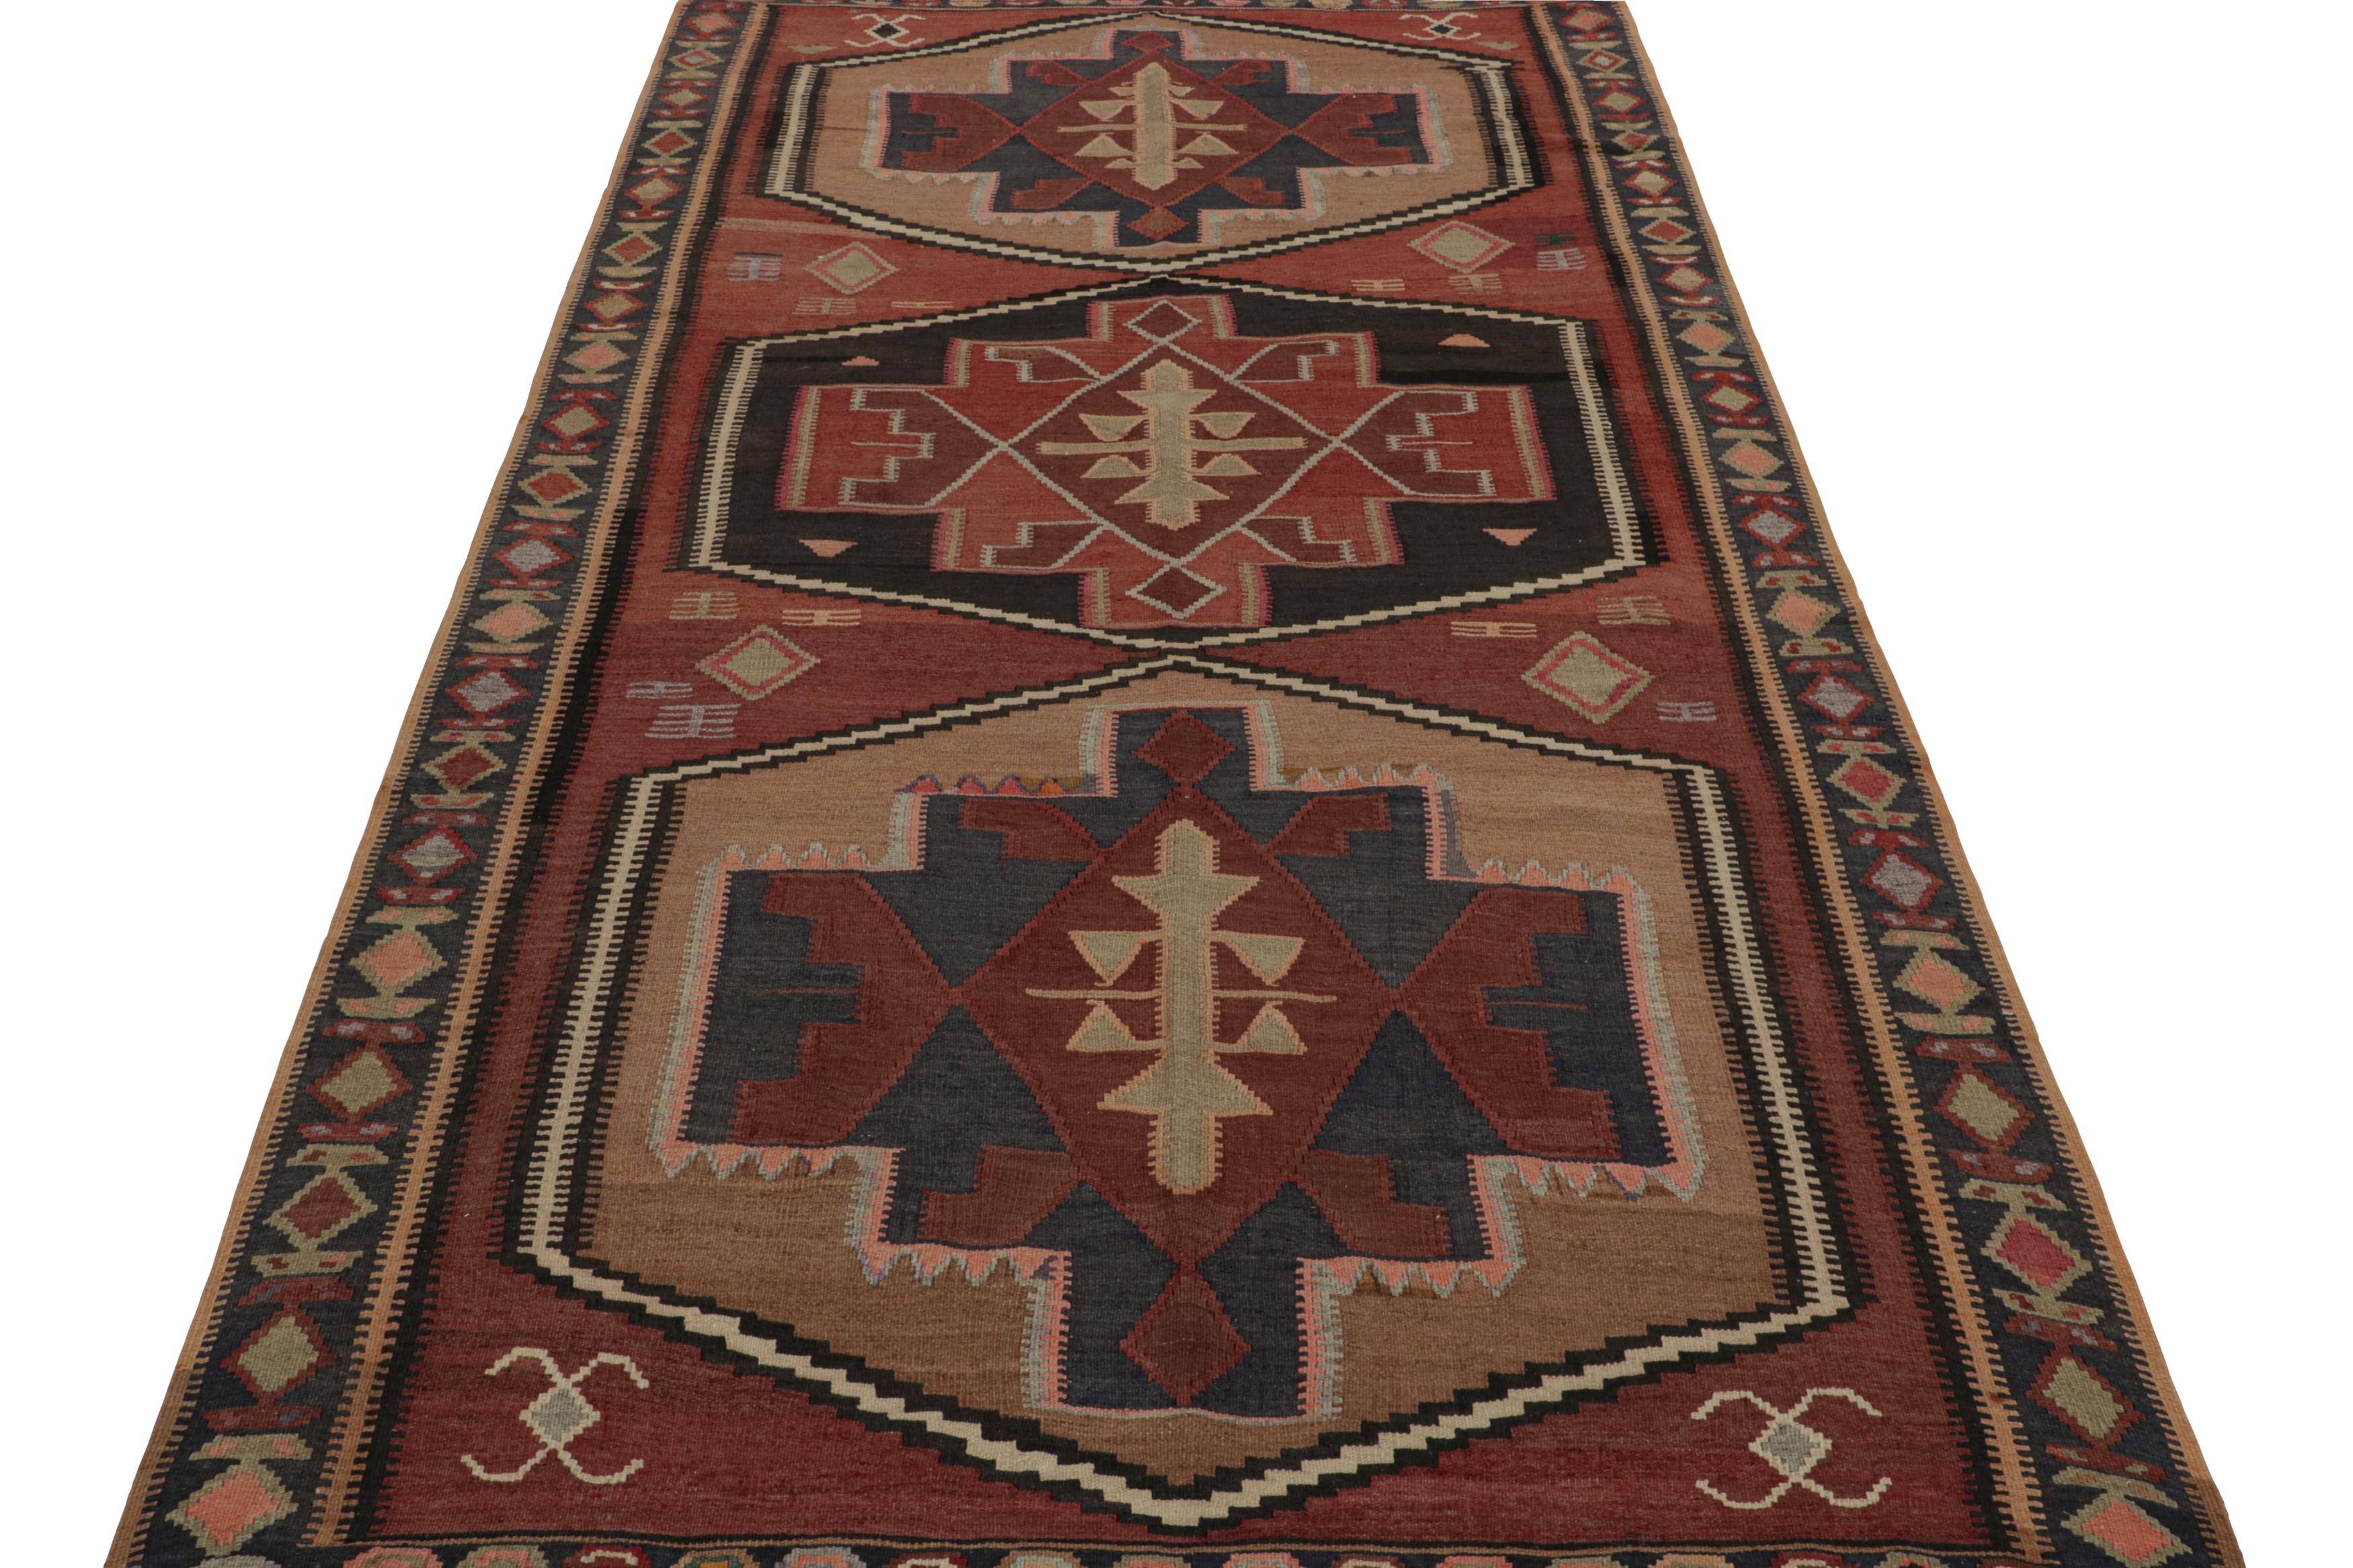 Tribal Vintage tribal Afghan Kilim rug in Red, with Medallions, from Rug & Kilim For Sale